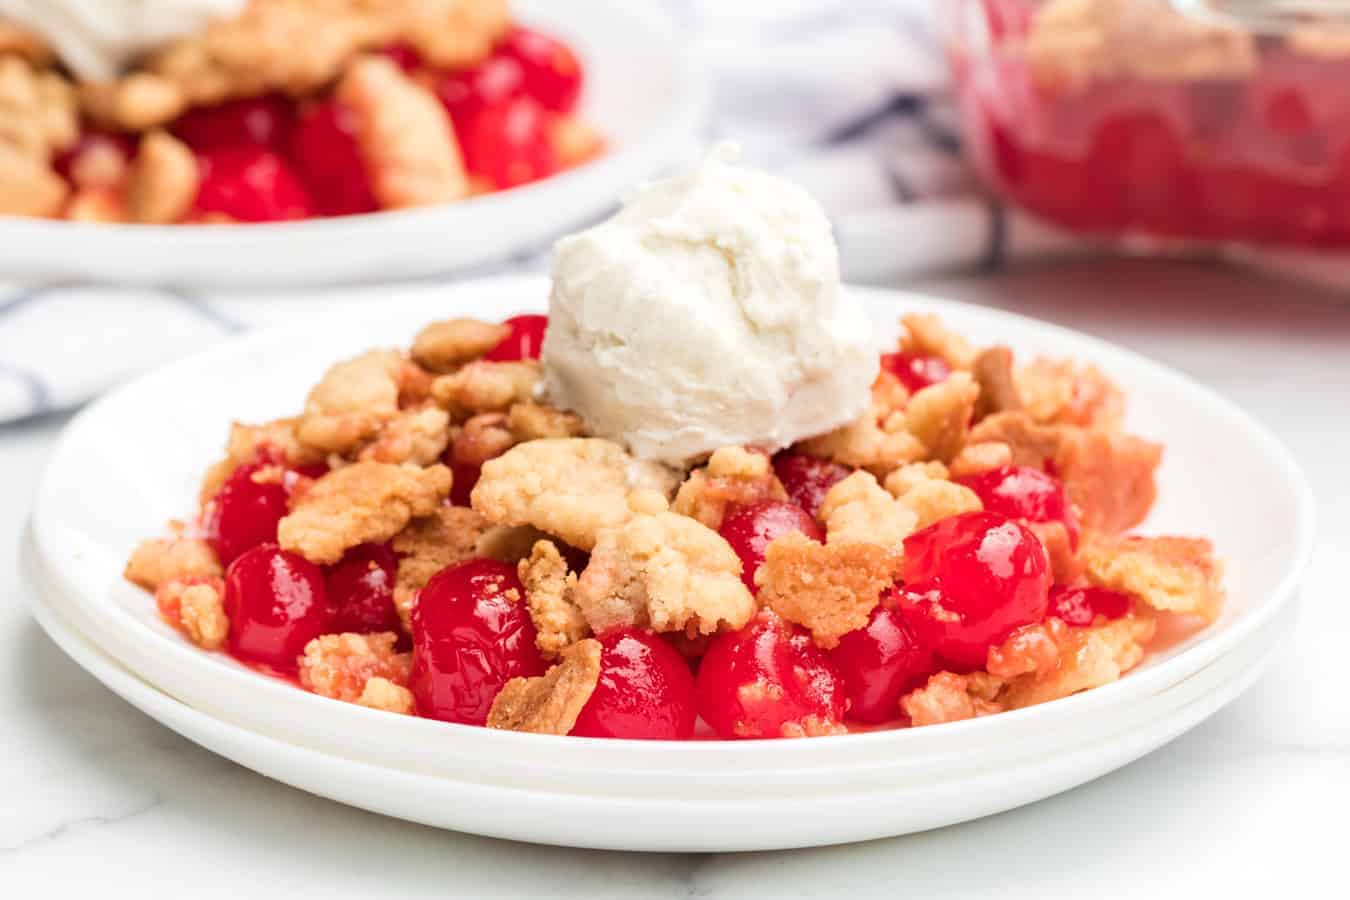 Sweet and tart with the perfect buttery, crumbly topping, homemade cherry crumble is an absolute game changer when it comes to festive and fun summertime dessert.